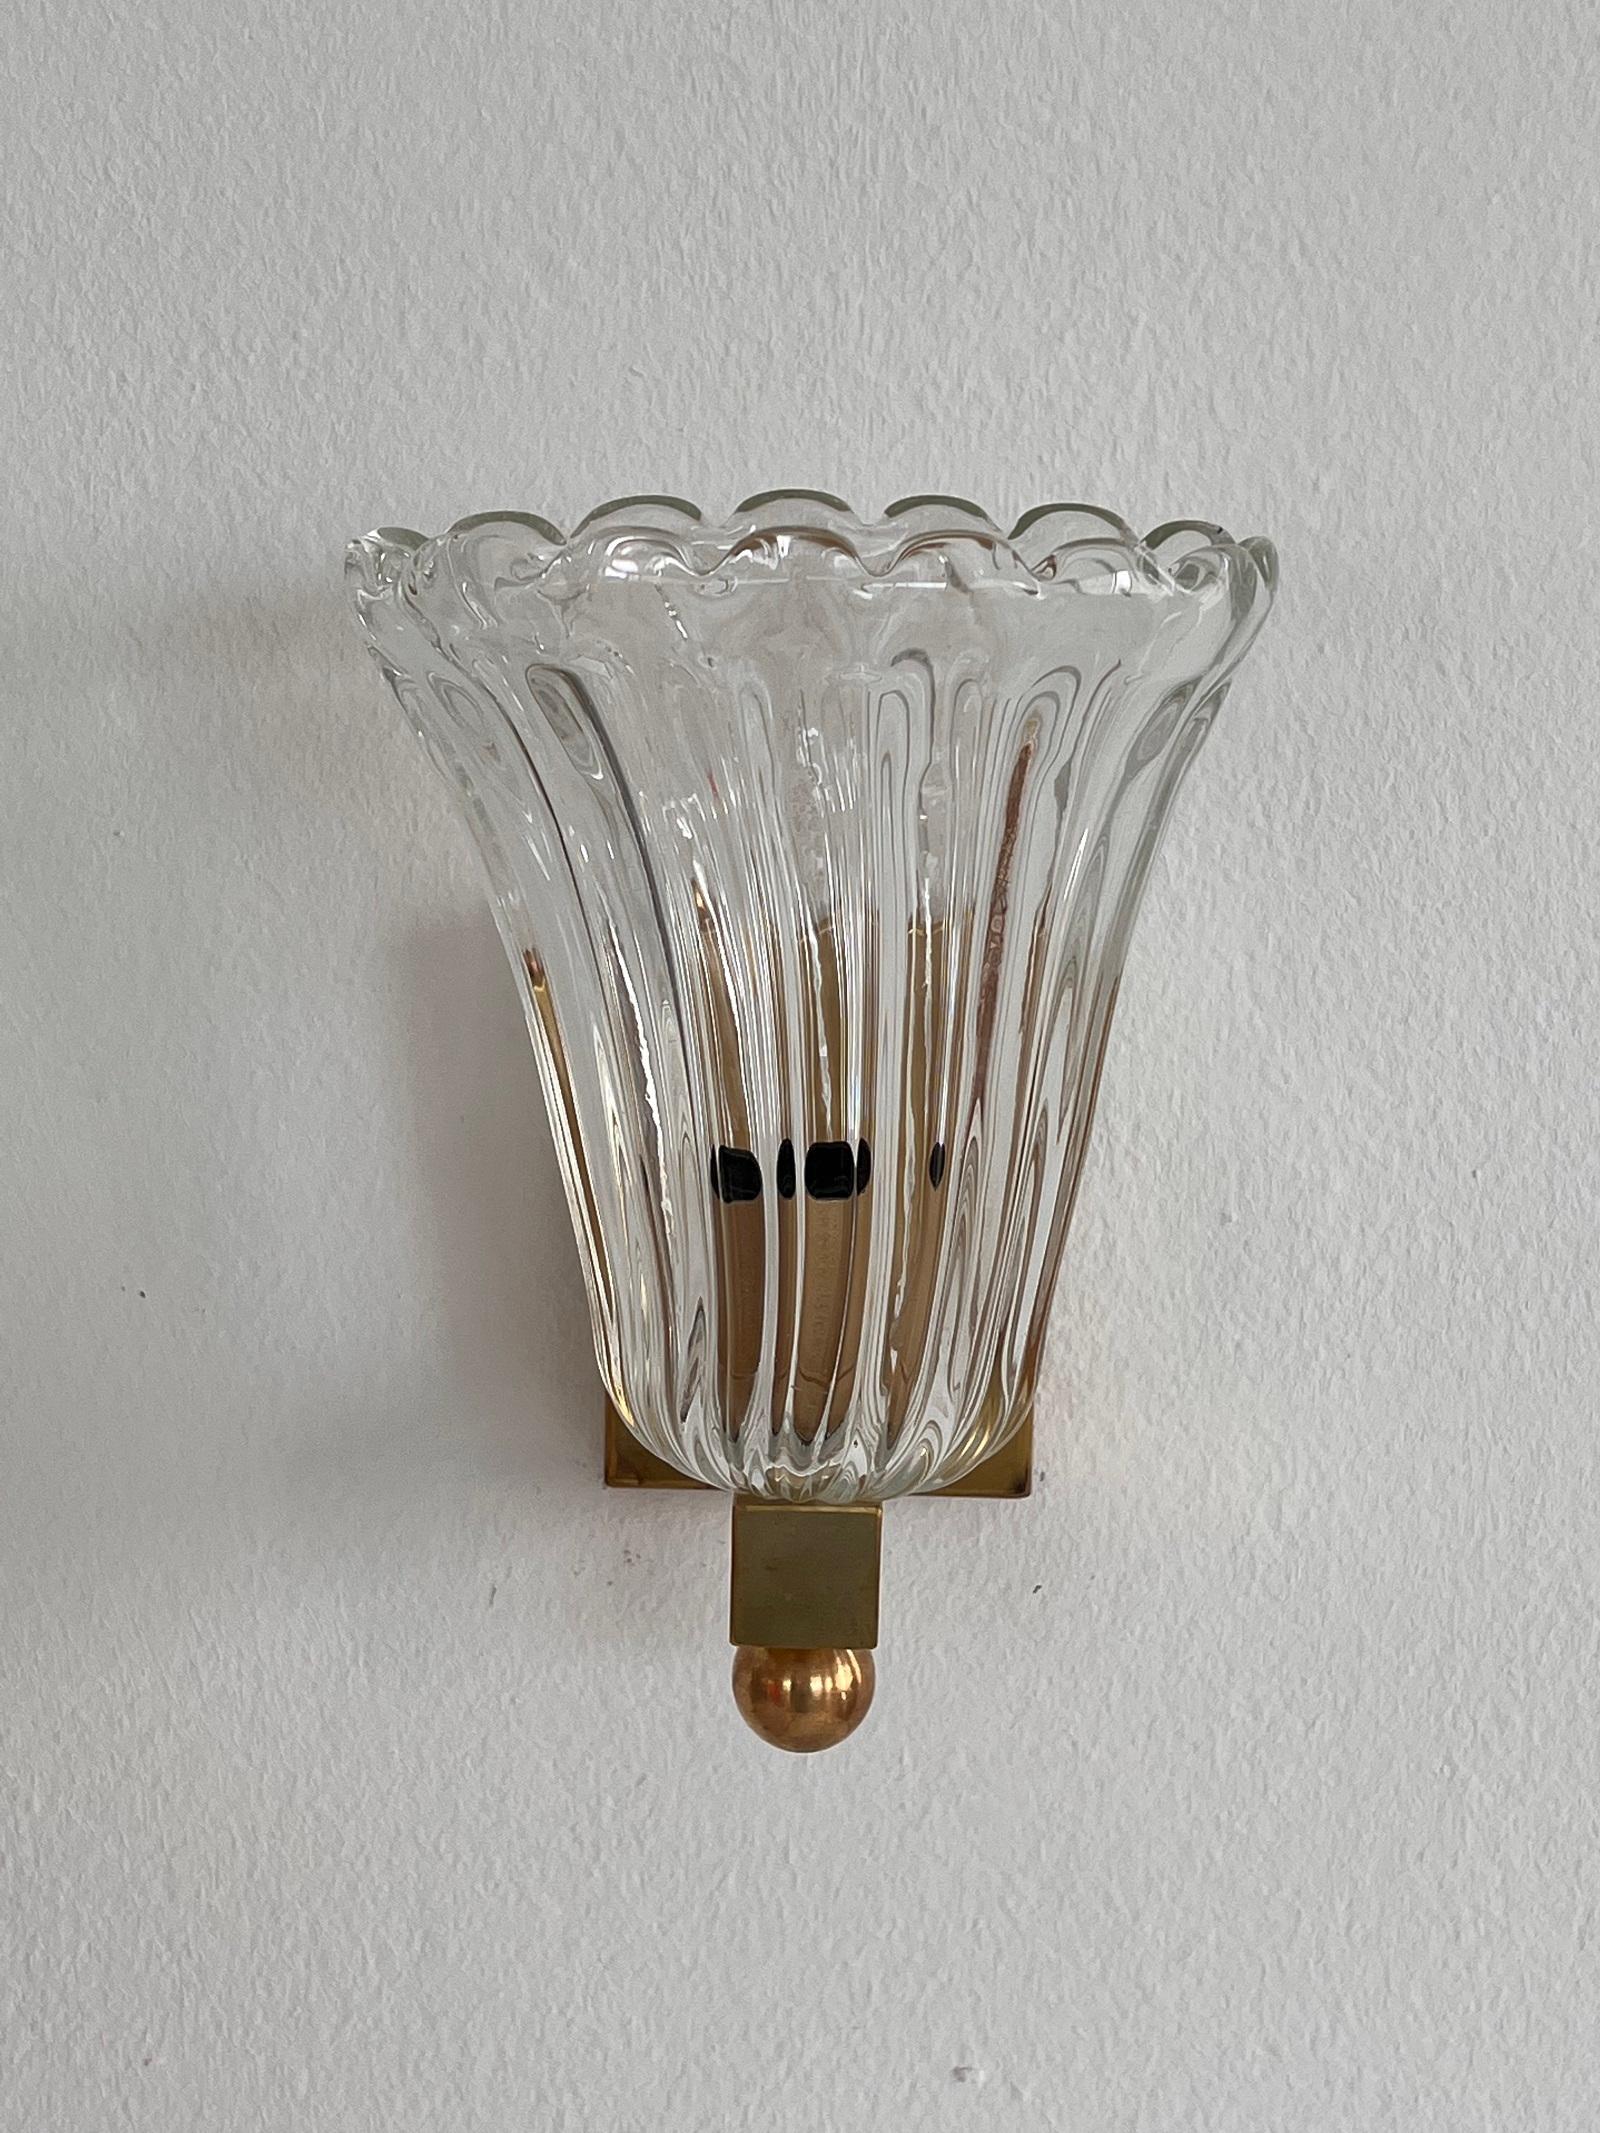 Italian Brass and Murano Glass Wall Lights or Sconces in Art Deco Style, 1990s For Sale 4